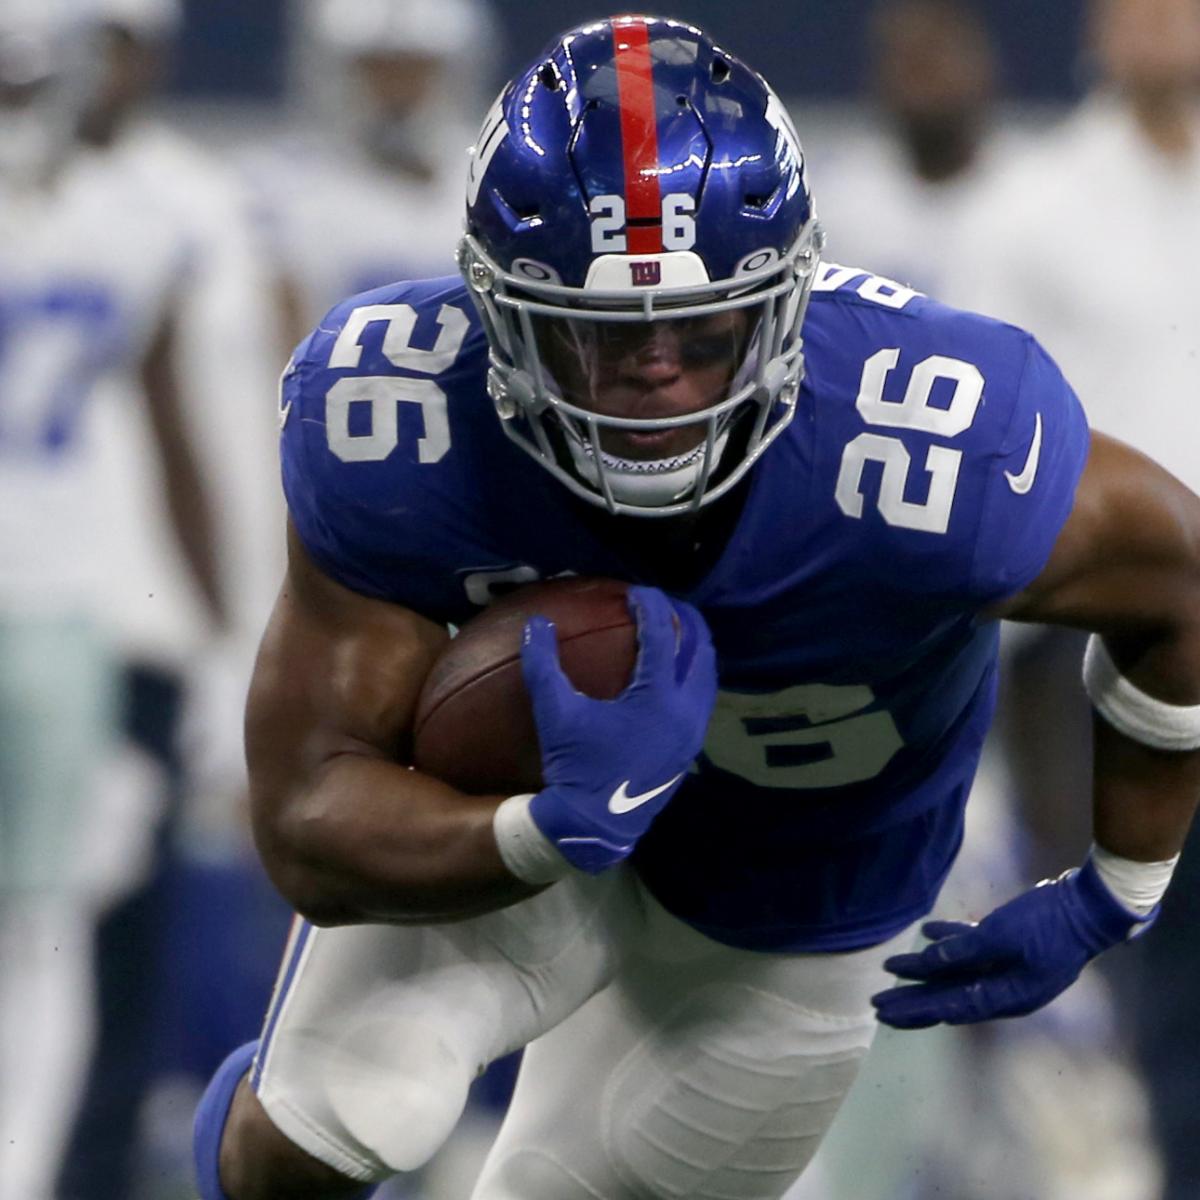 Report: Saquon Barkley Gives Tickets to Giants Fan Snubbed by DeMarcus Lawrence